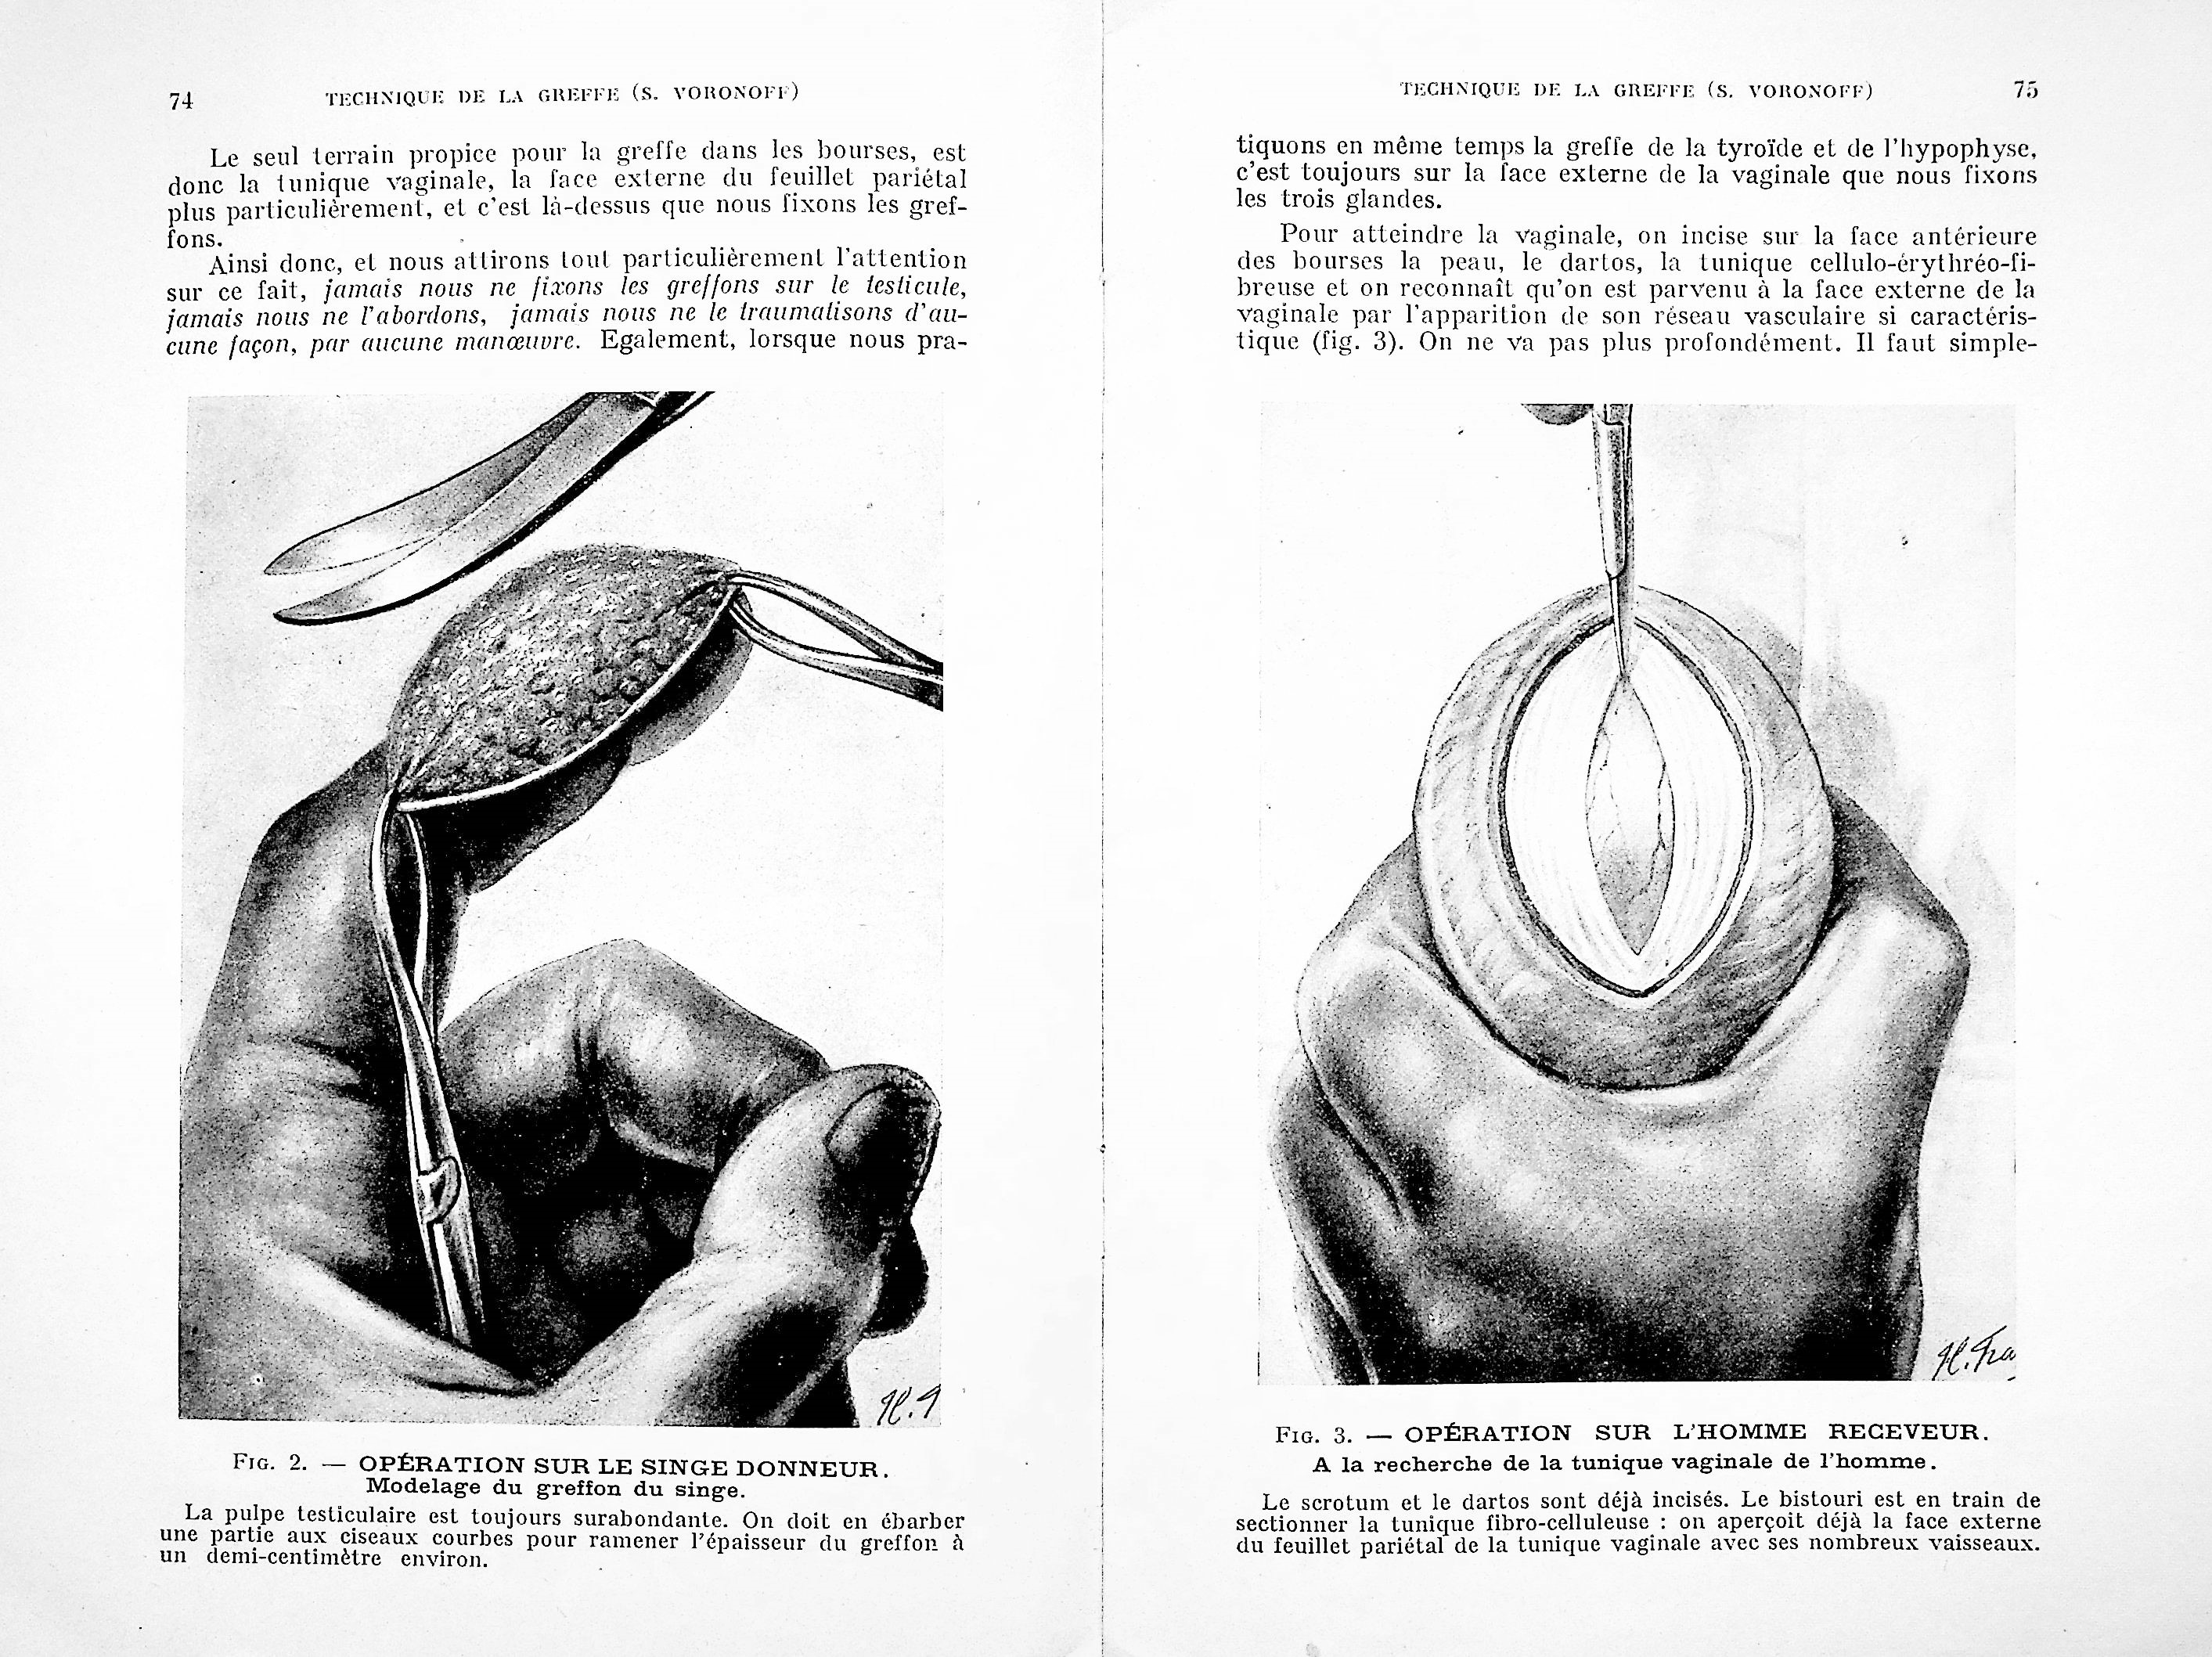 Image for 1) La greffe testiculaire. Technique operatoire, evolution histologique, manifestations physiologiques, published in Technique Chirurgicale, No 4, June 1967; 2) Testicular grafting from ape to man. Operative technique, histological evolution, physiological manifestations.